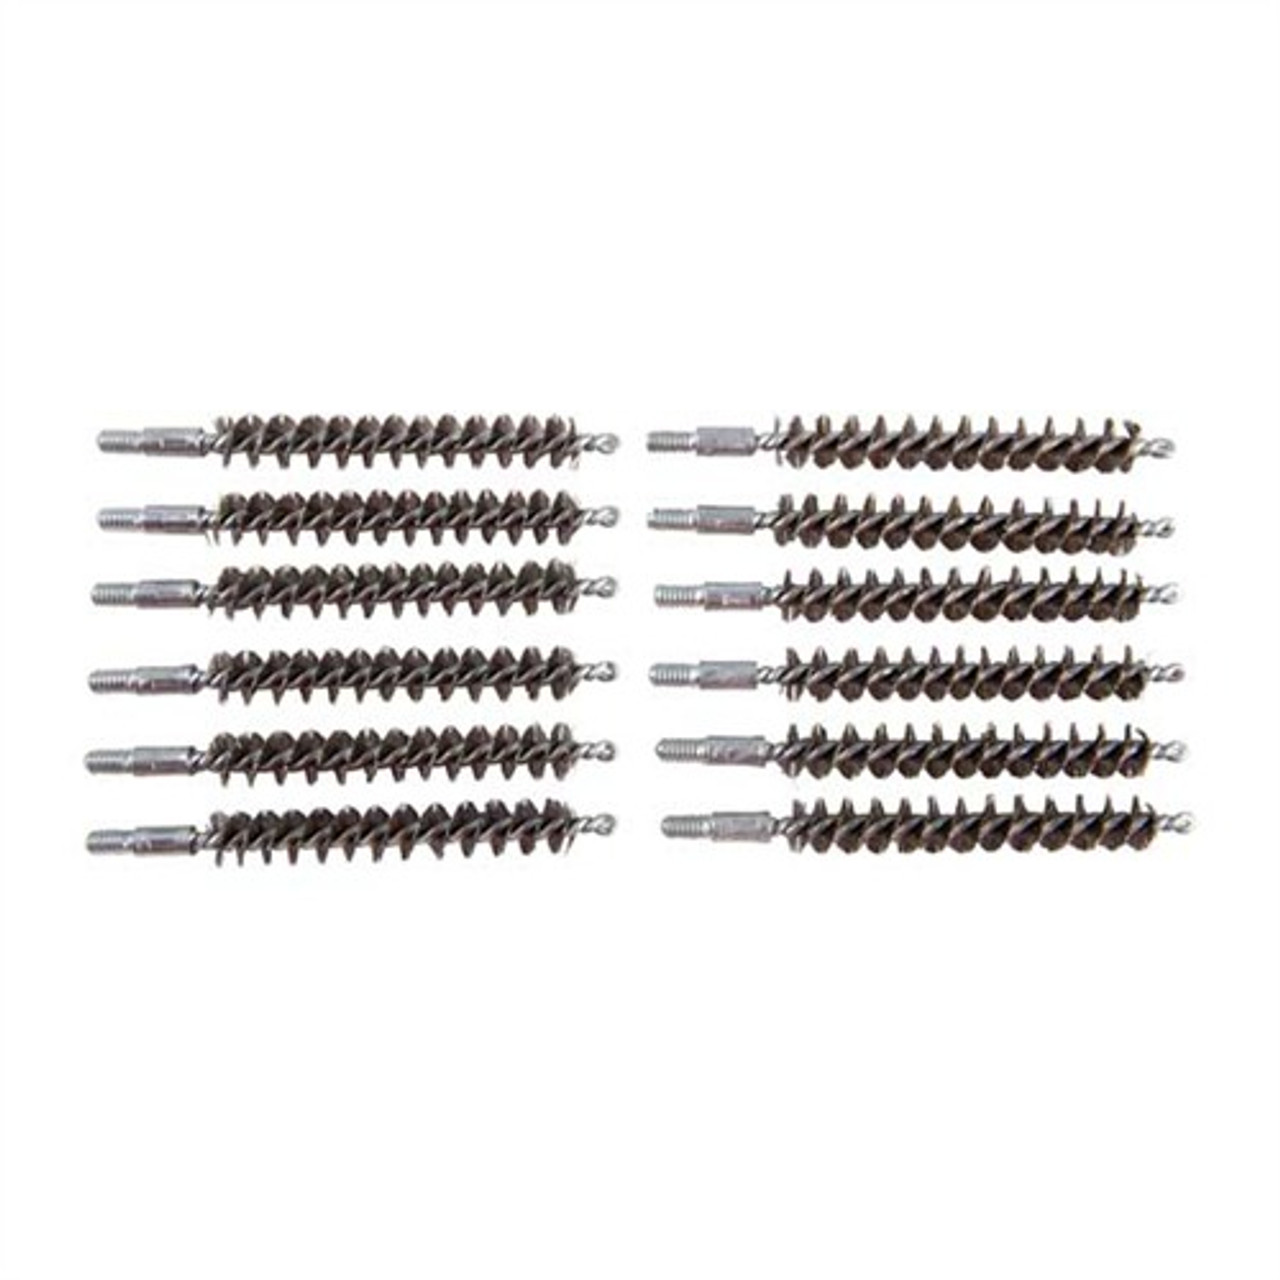 Brownells - 338 Caliber Standard Line Stainless Rifle Brush 12 Pack